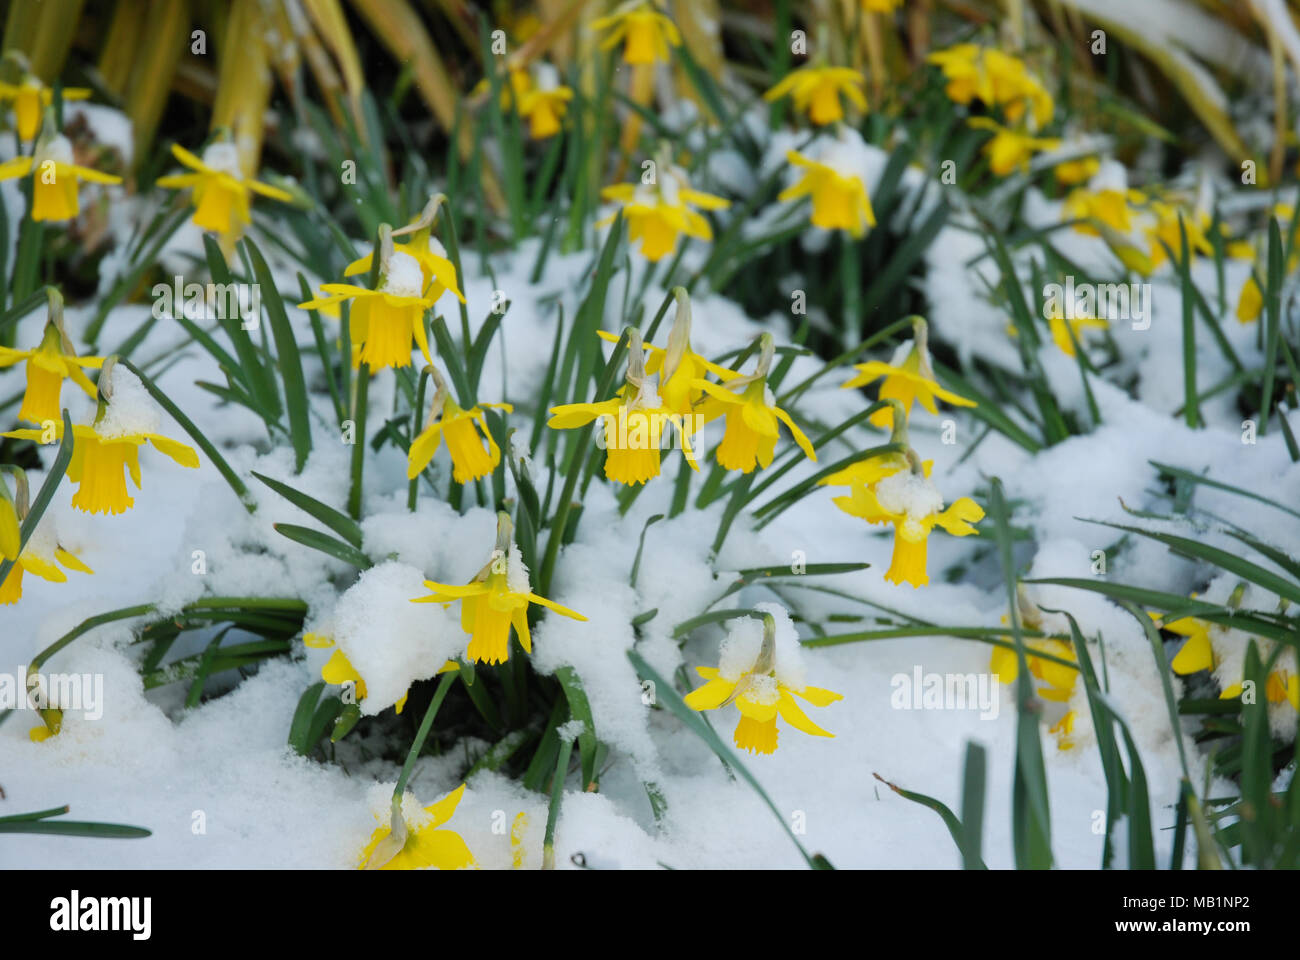 Daffodils in the snow Stock Photo